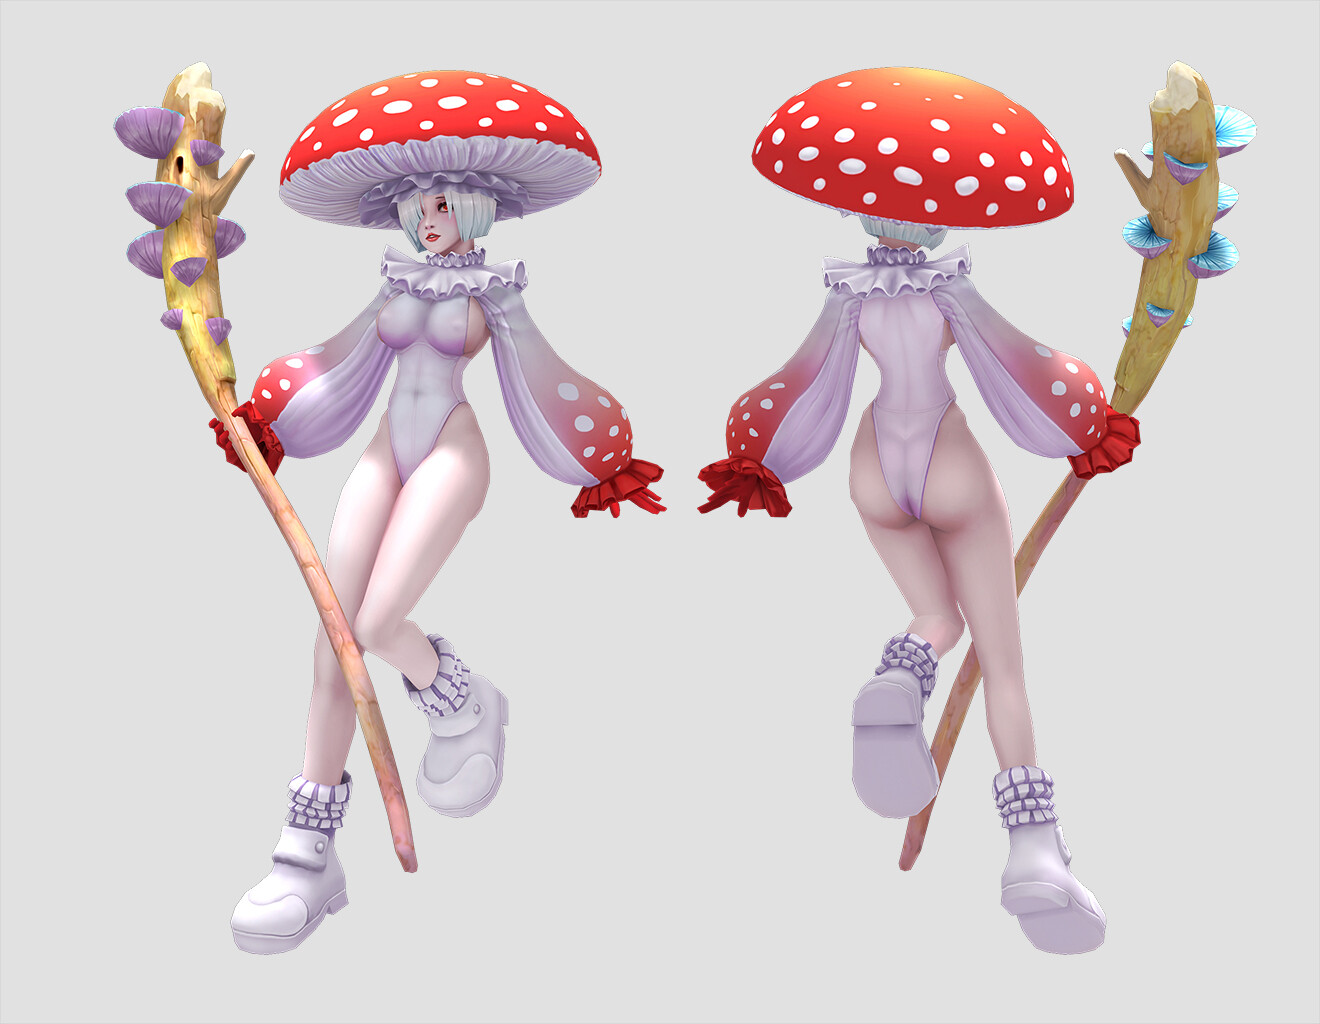 Mushroom Anthropomorphic Girl Character Illustration PNG Image Free  Download And Clipart Image For Free Download - Lovepik | 611021971